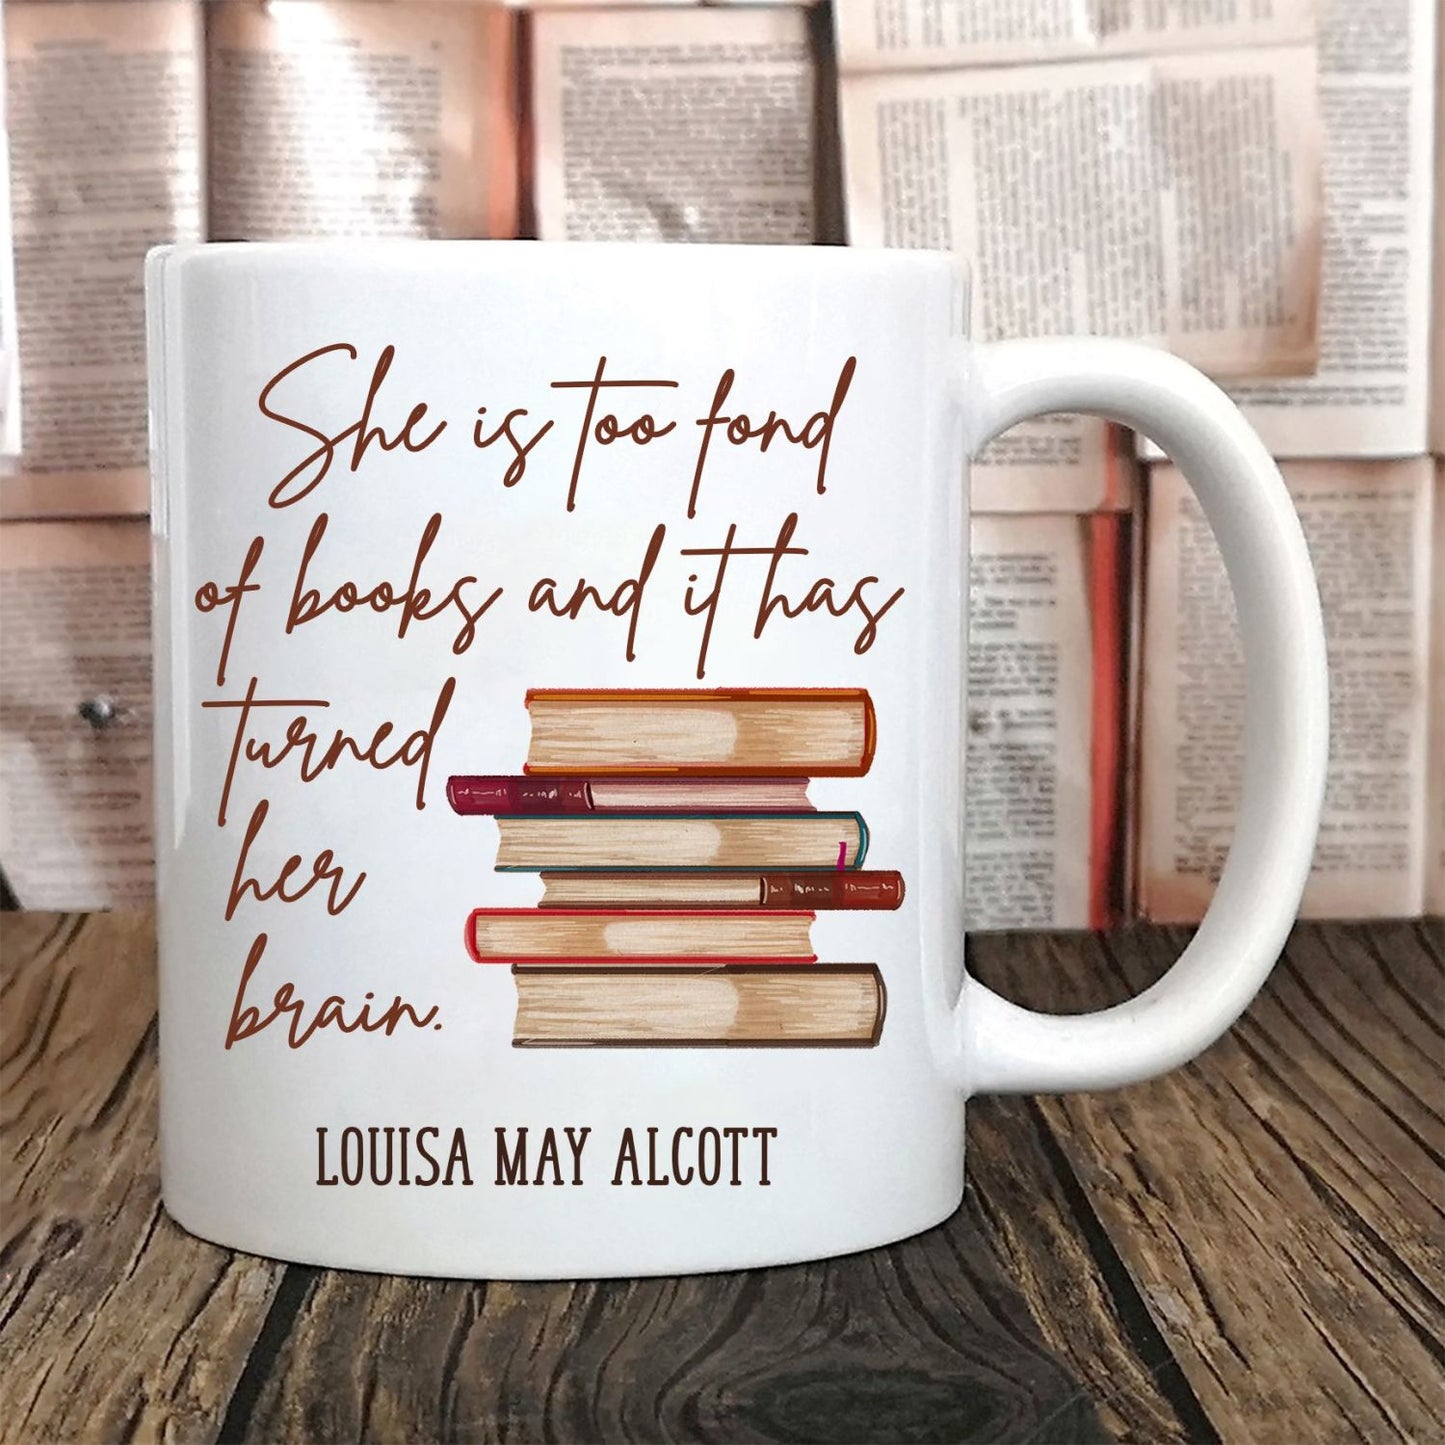 Mug - She is too fond of books quote - Louisa May Alcott